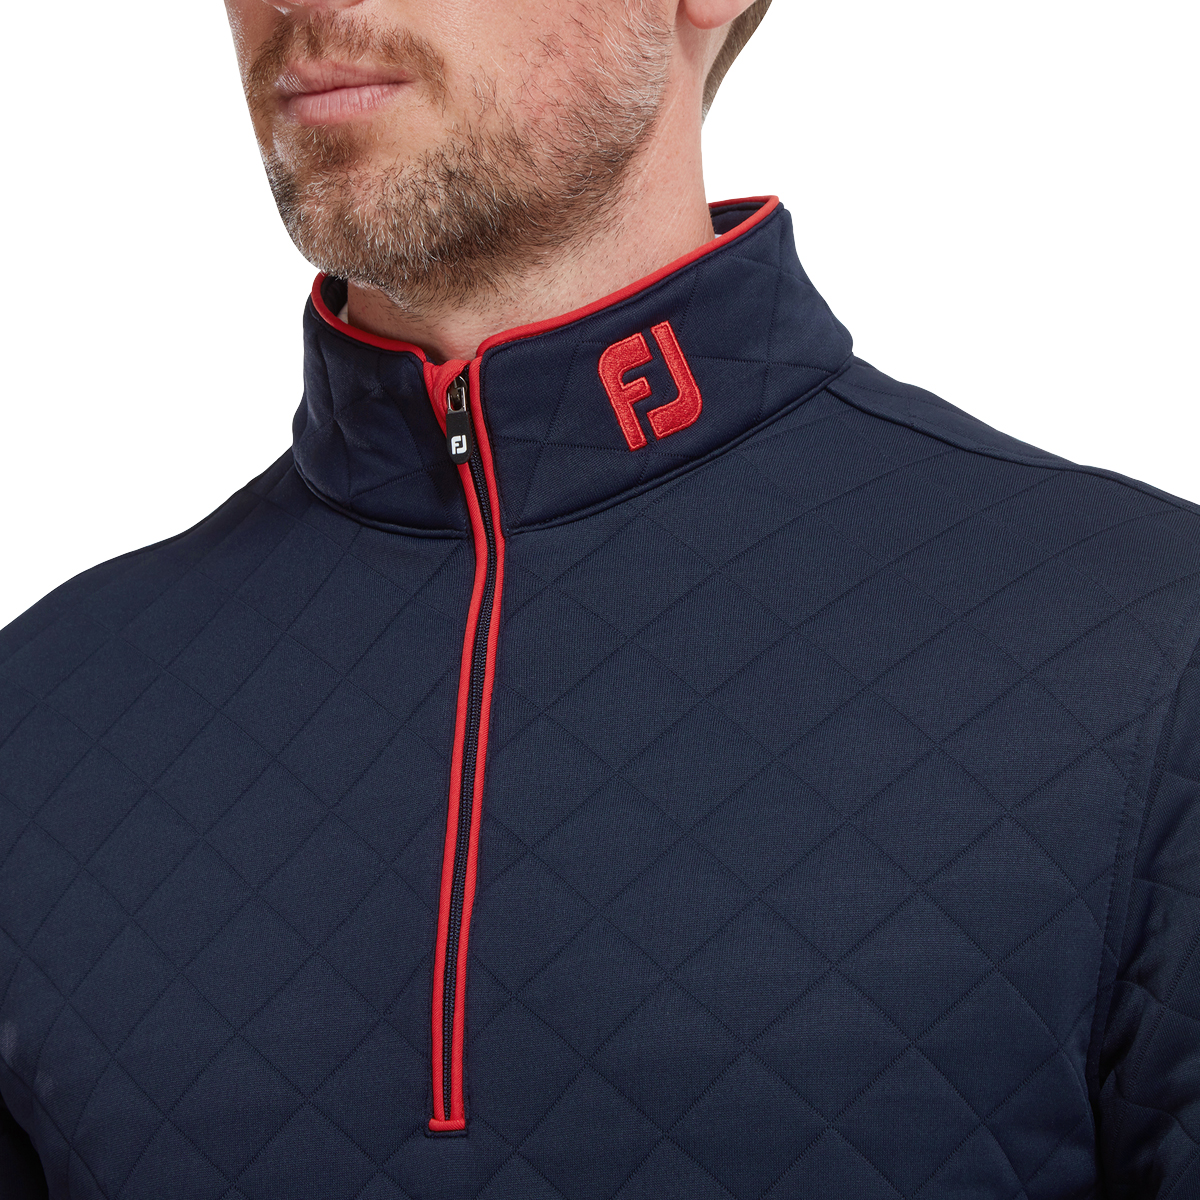 FootJoy Mens Diamond Jacquard Chill-Out Golf Mid-Layer Pullover 